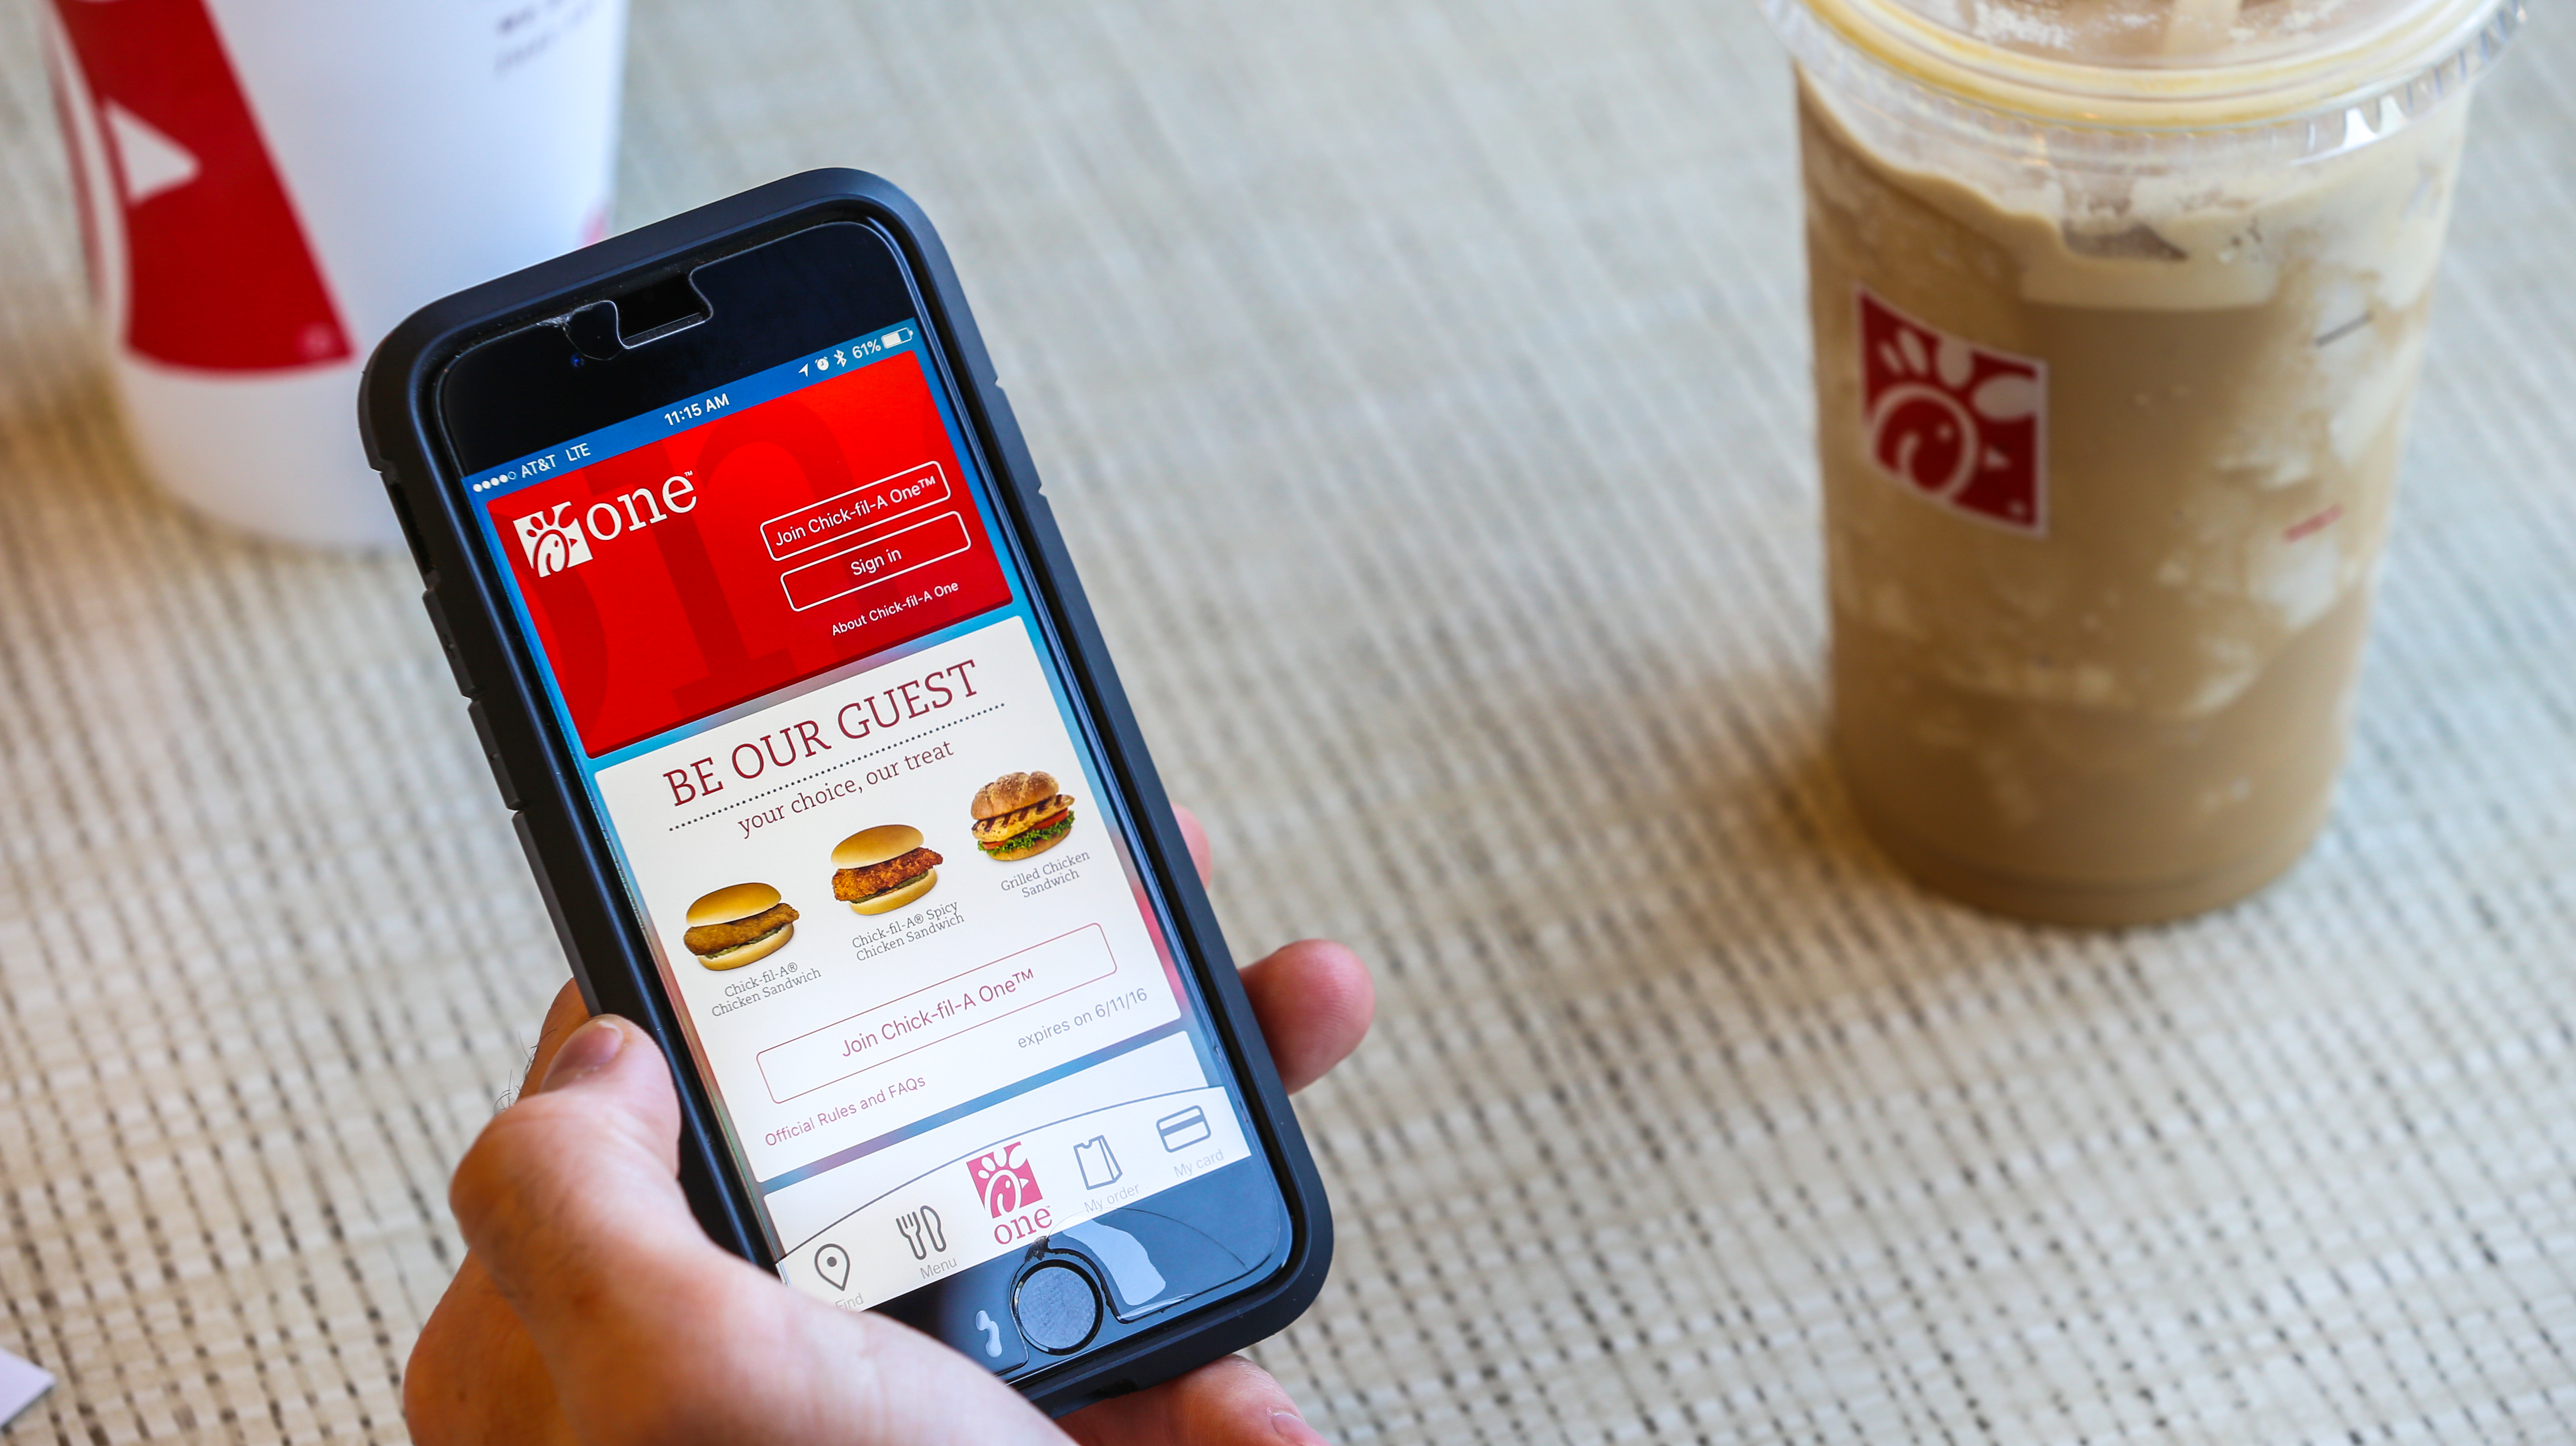 Get free chick-fil-a grilled chicken nuggets when you download this Chick-fil-A One app